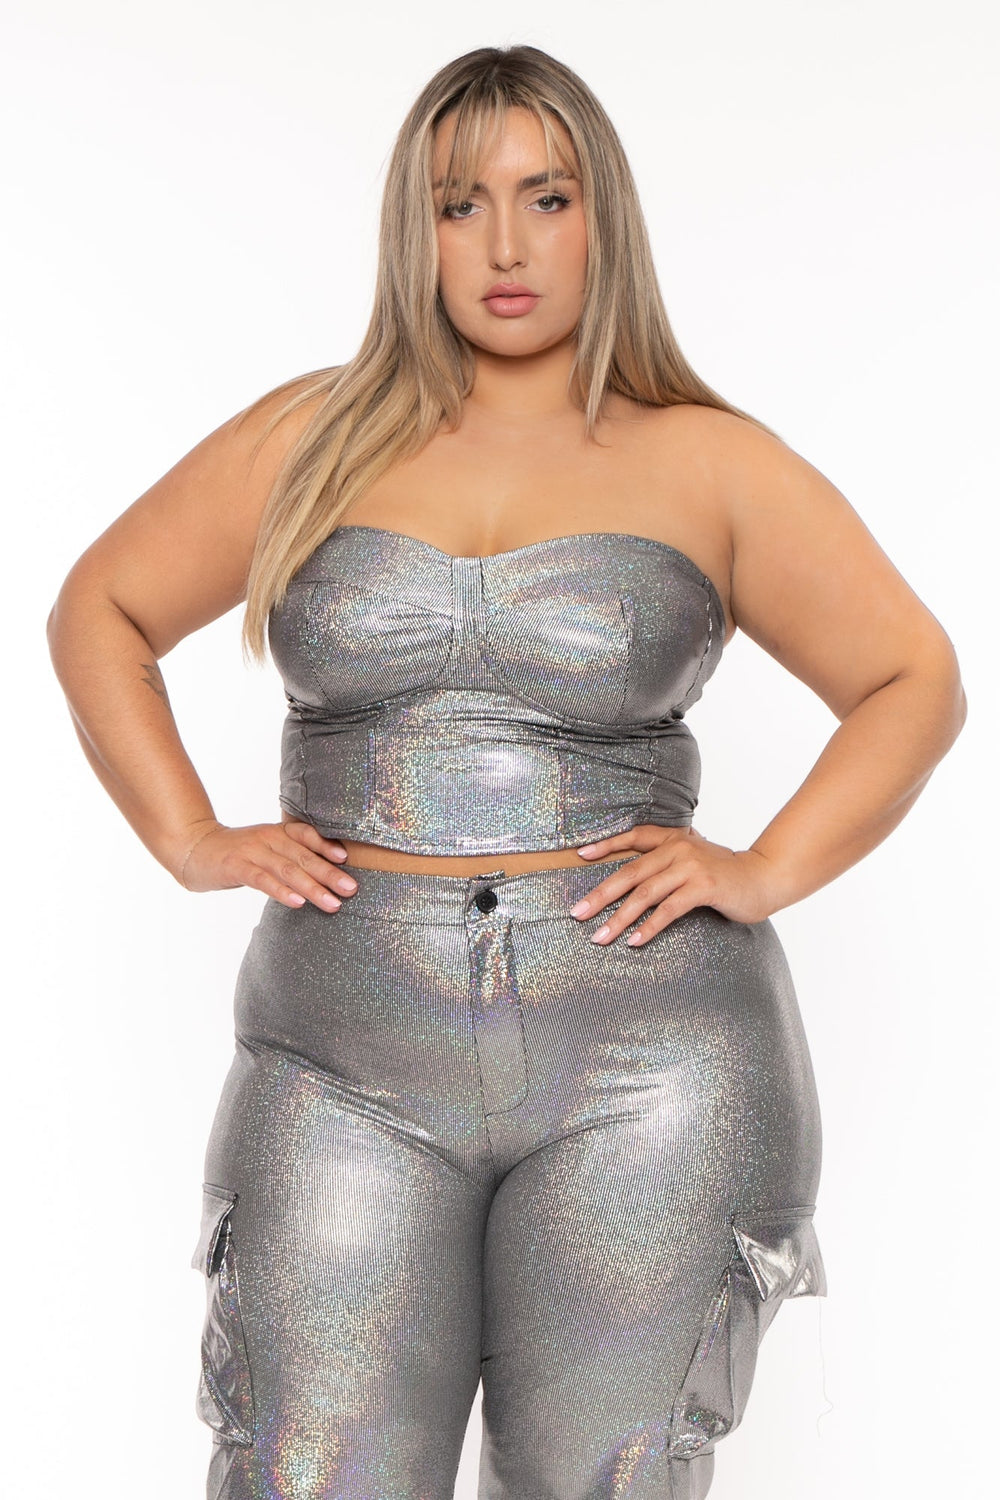 D ROCK Matching Sets Plus Size  Delicia Metallic  Matching Set  -Silver